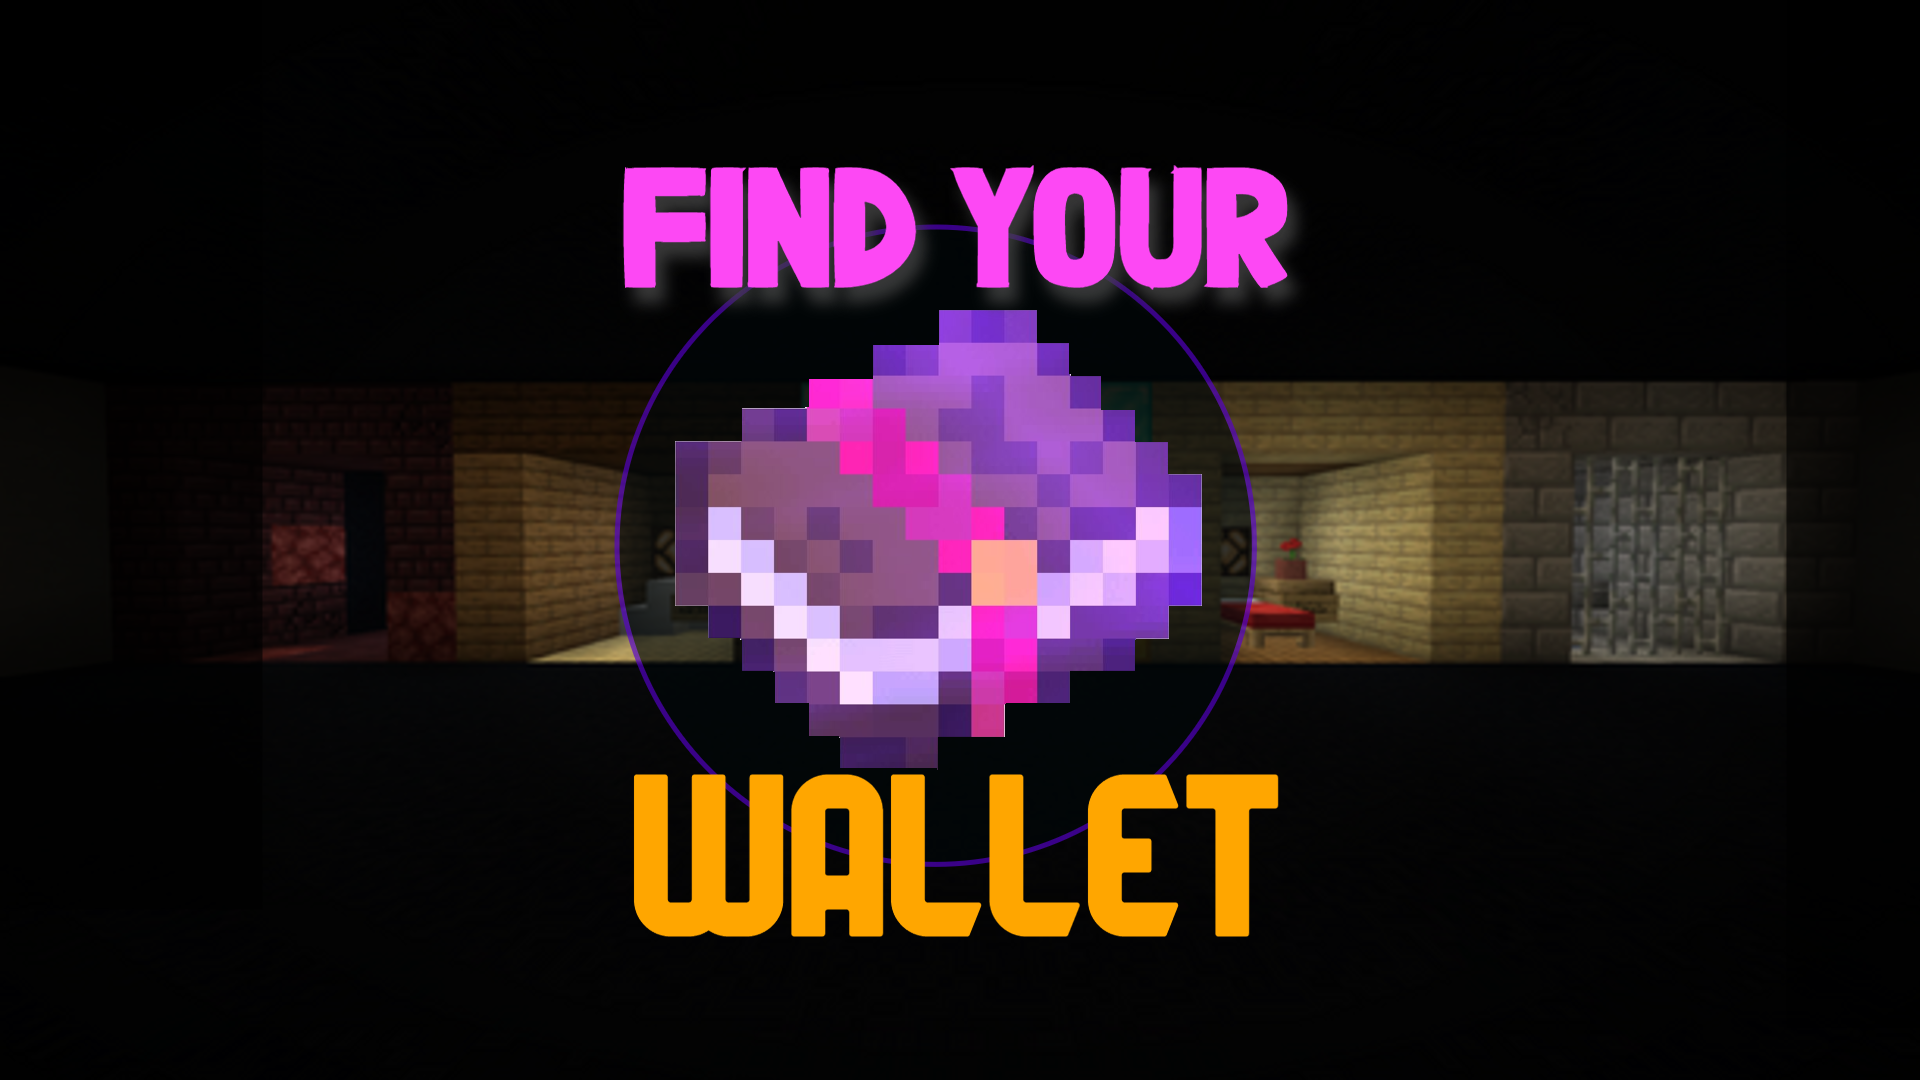 Télécharger Find Your Wallet: Remastered pour Minecraft 1.16.4